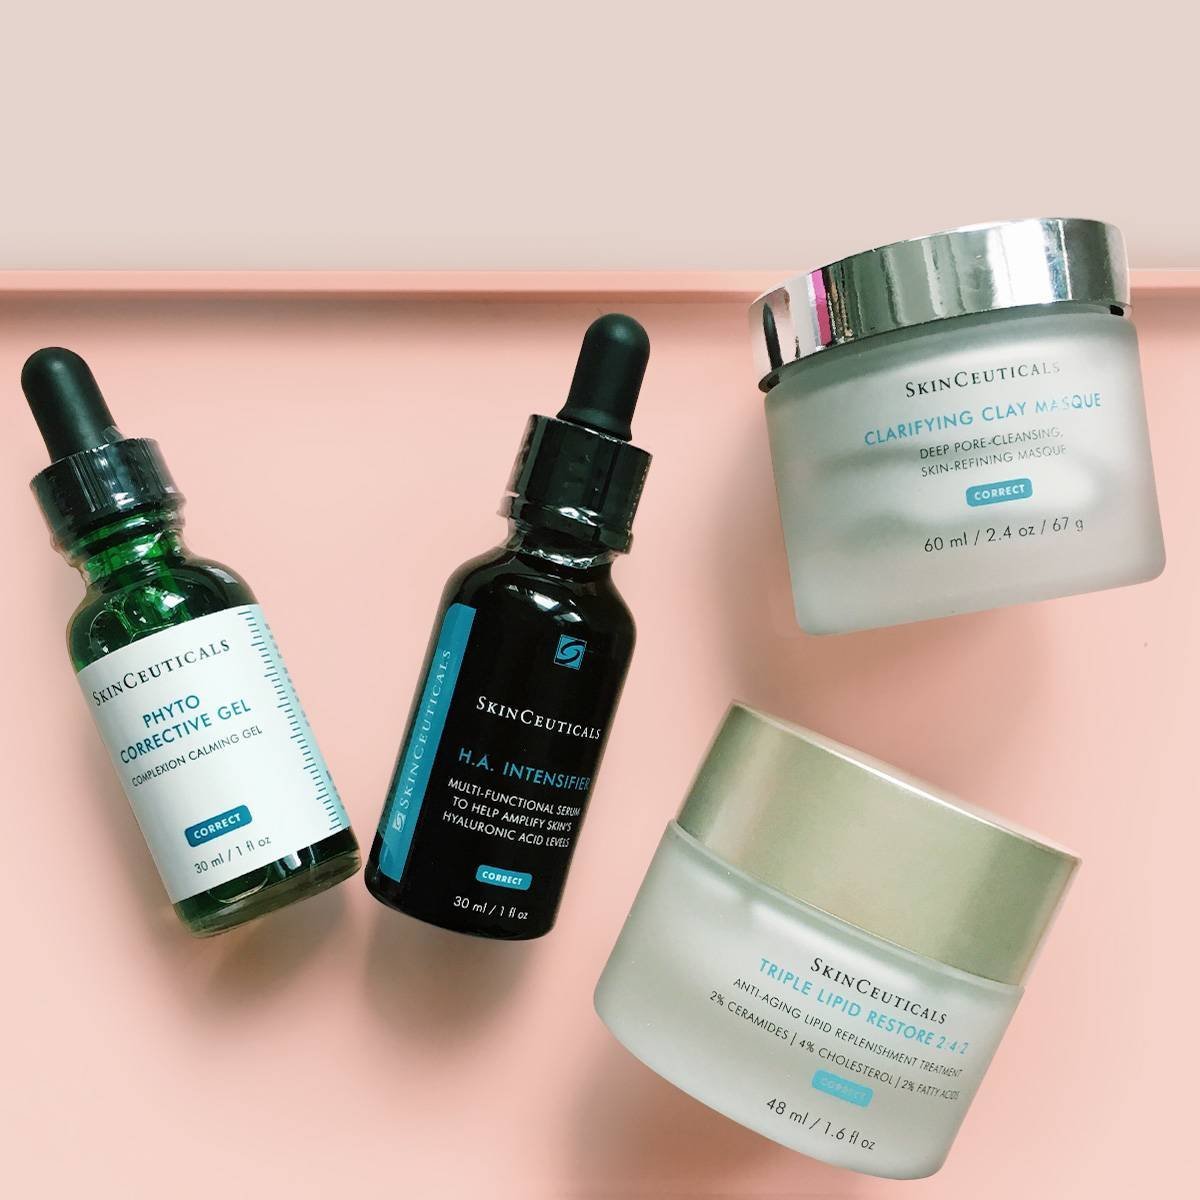 skinceuticals skincare products